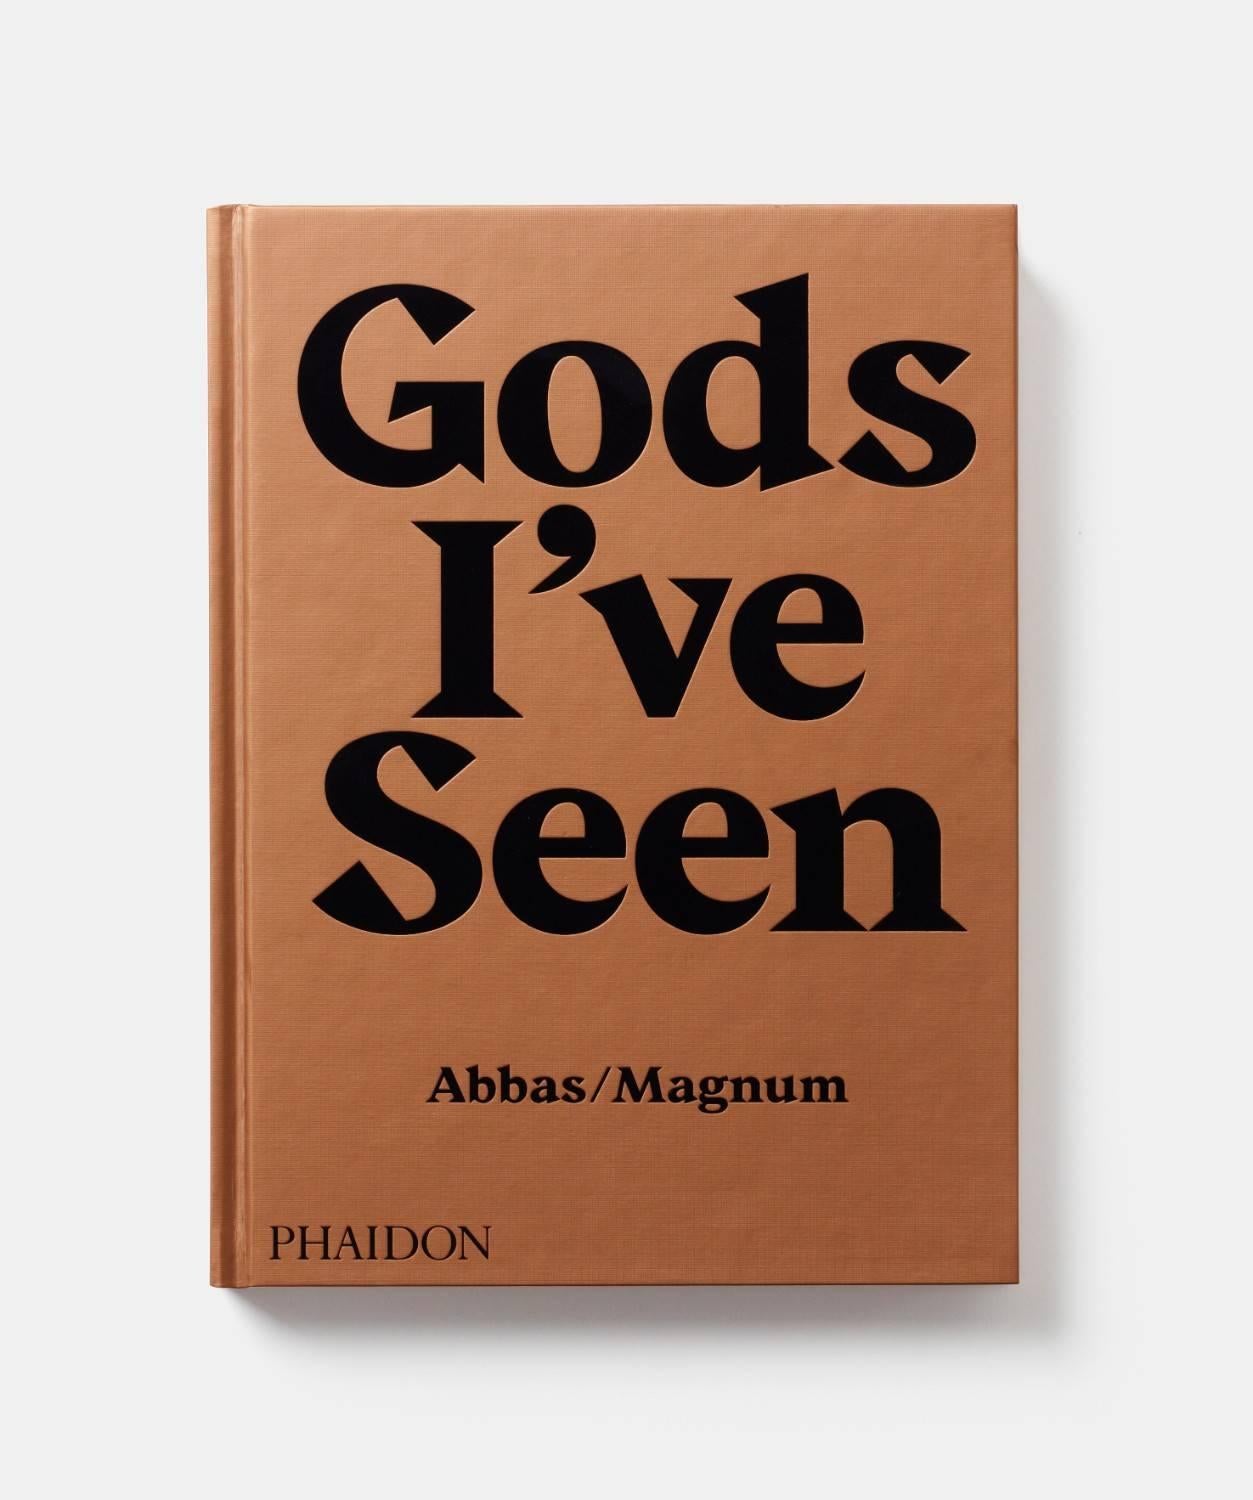 From the lens of Magnum's Abbas - the mystical world of the Hindu revealed, from ancient rites to contemporary beliefs

This latest in Abbas's transcendent series of books on major world religions, featuring ritualistic elements - wind, water,